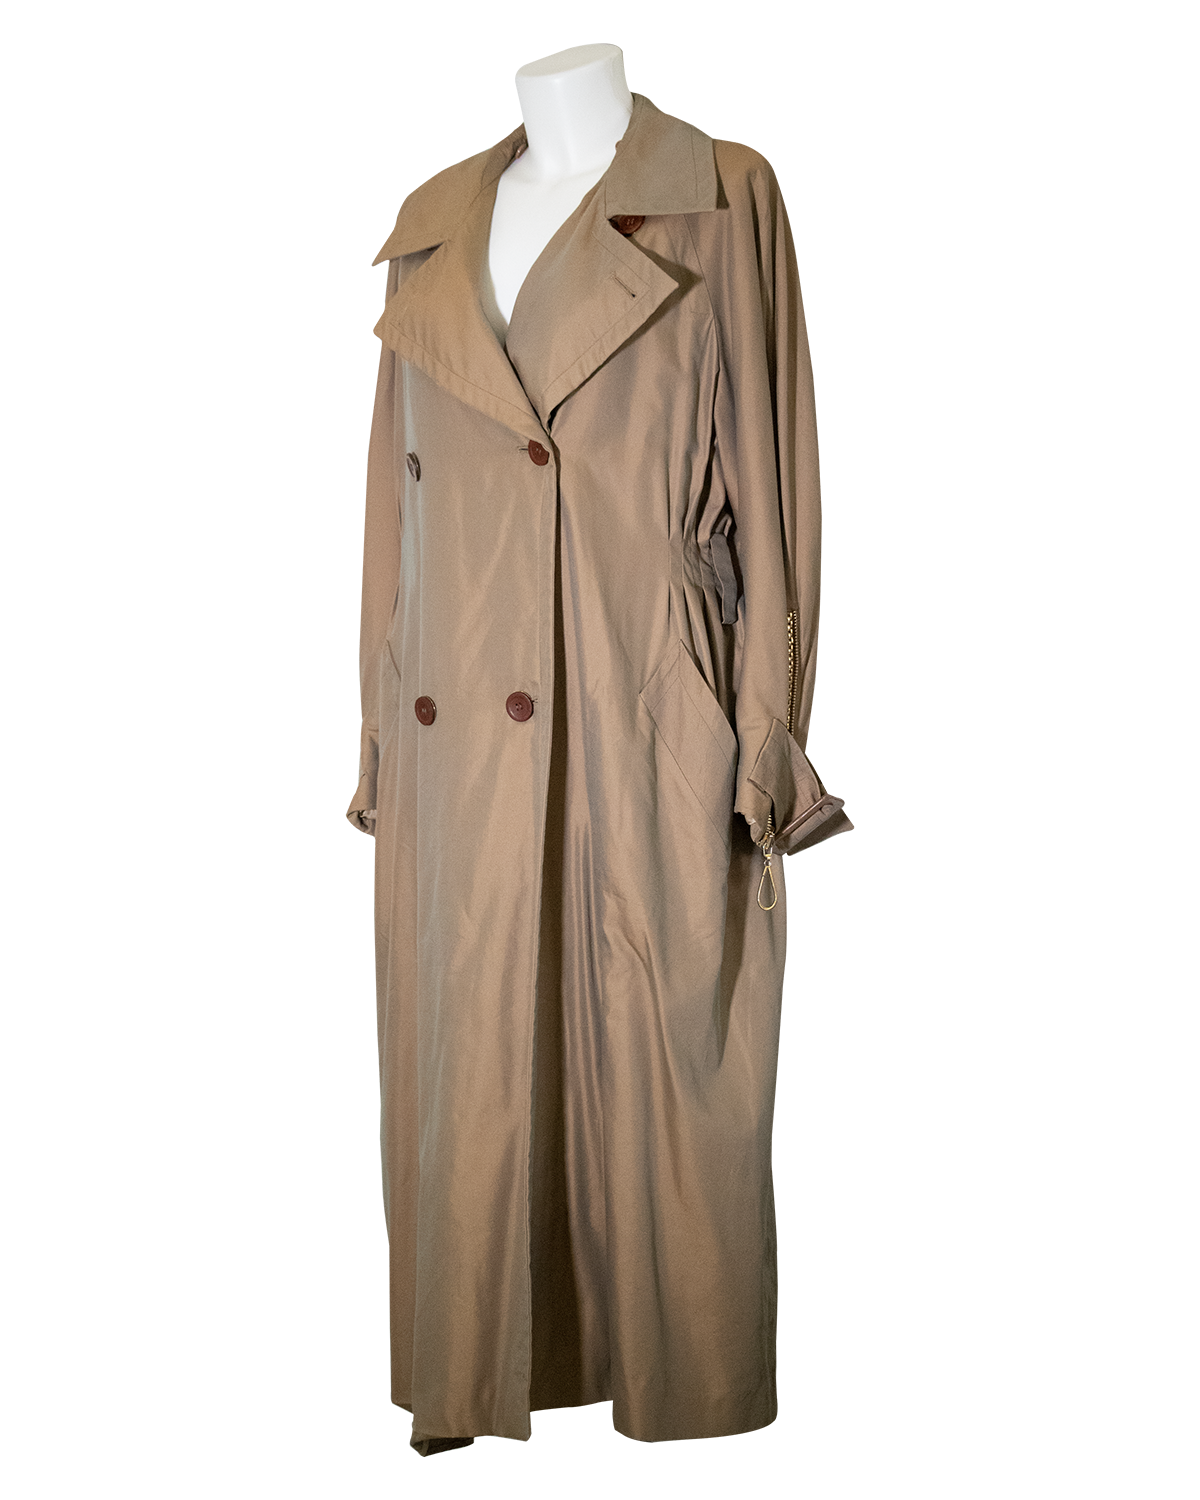 Gianfranco Ferré Trench Coat from 1980s